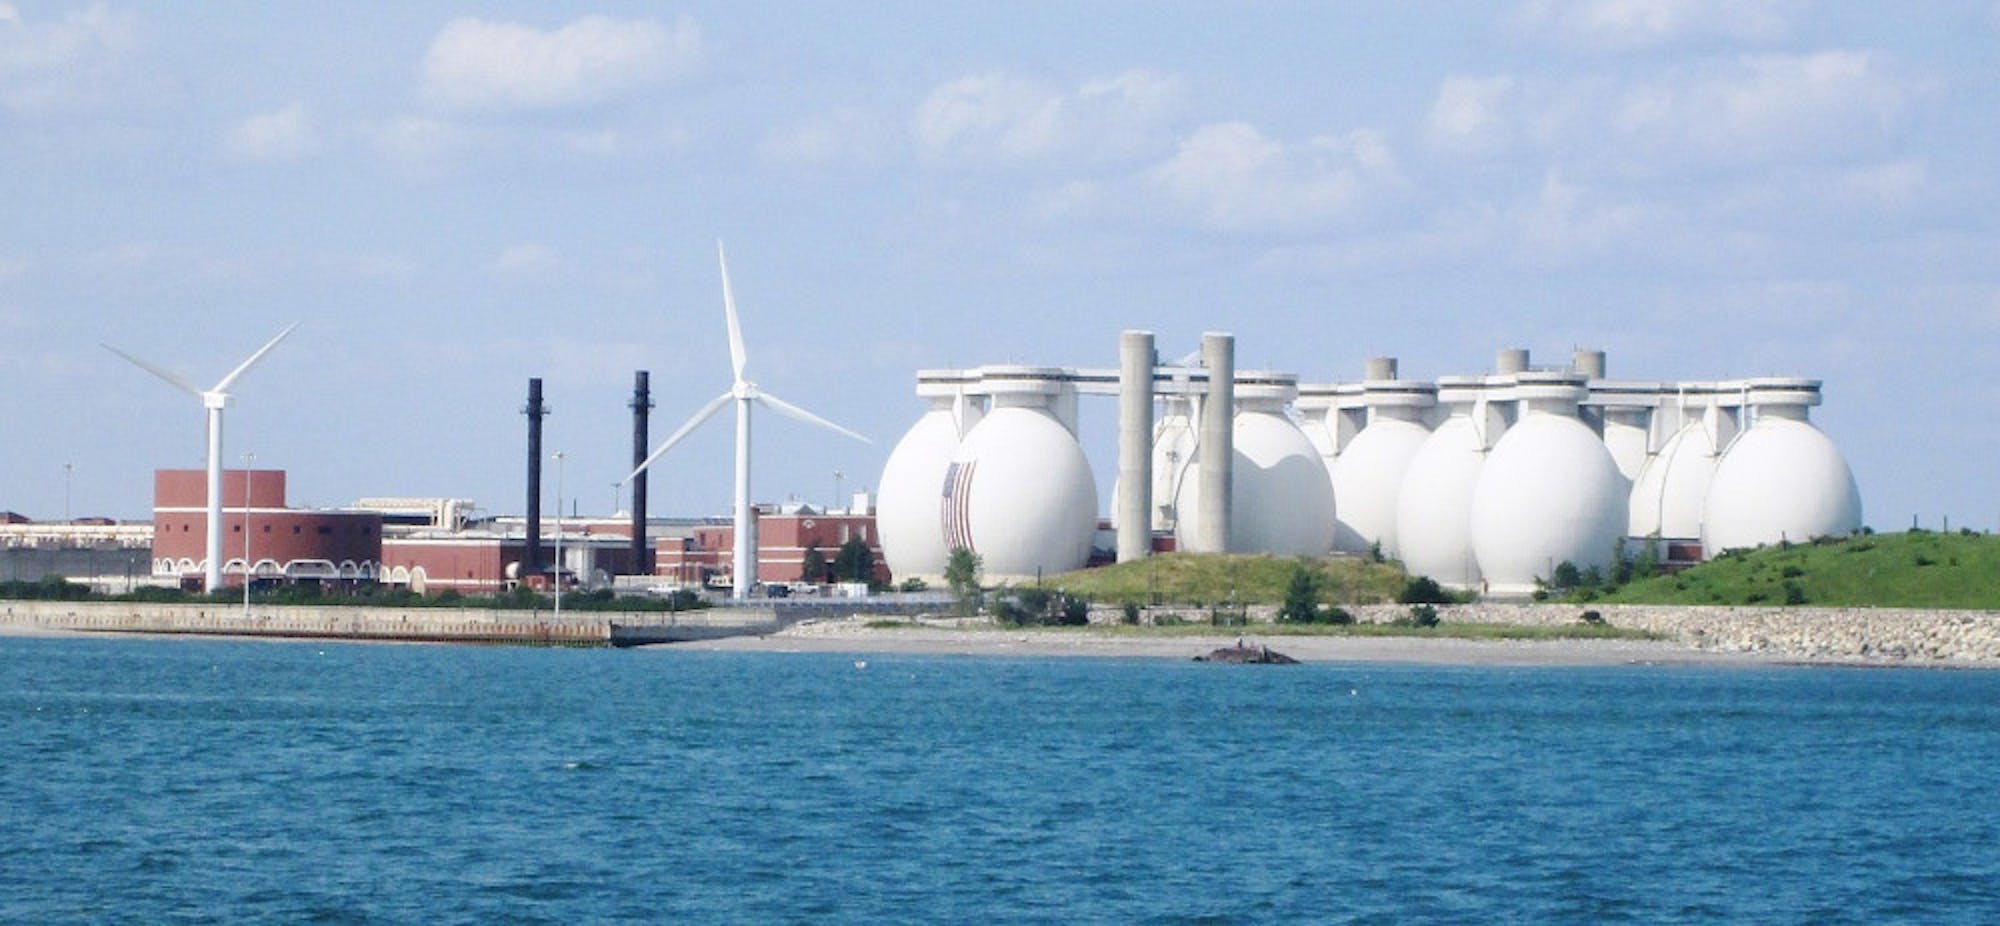 2017_deer_island_waste_water_treatment_plant_from_boston_harbor_1